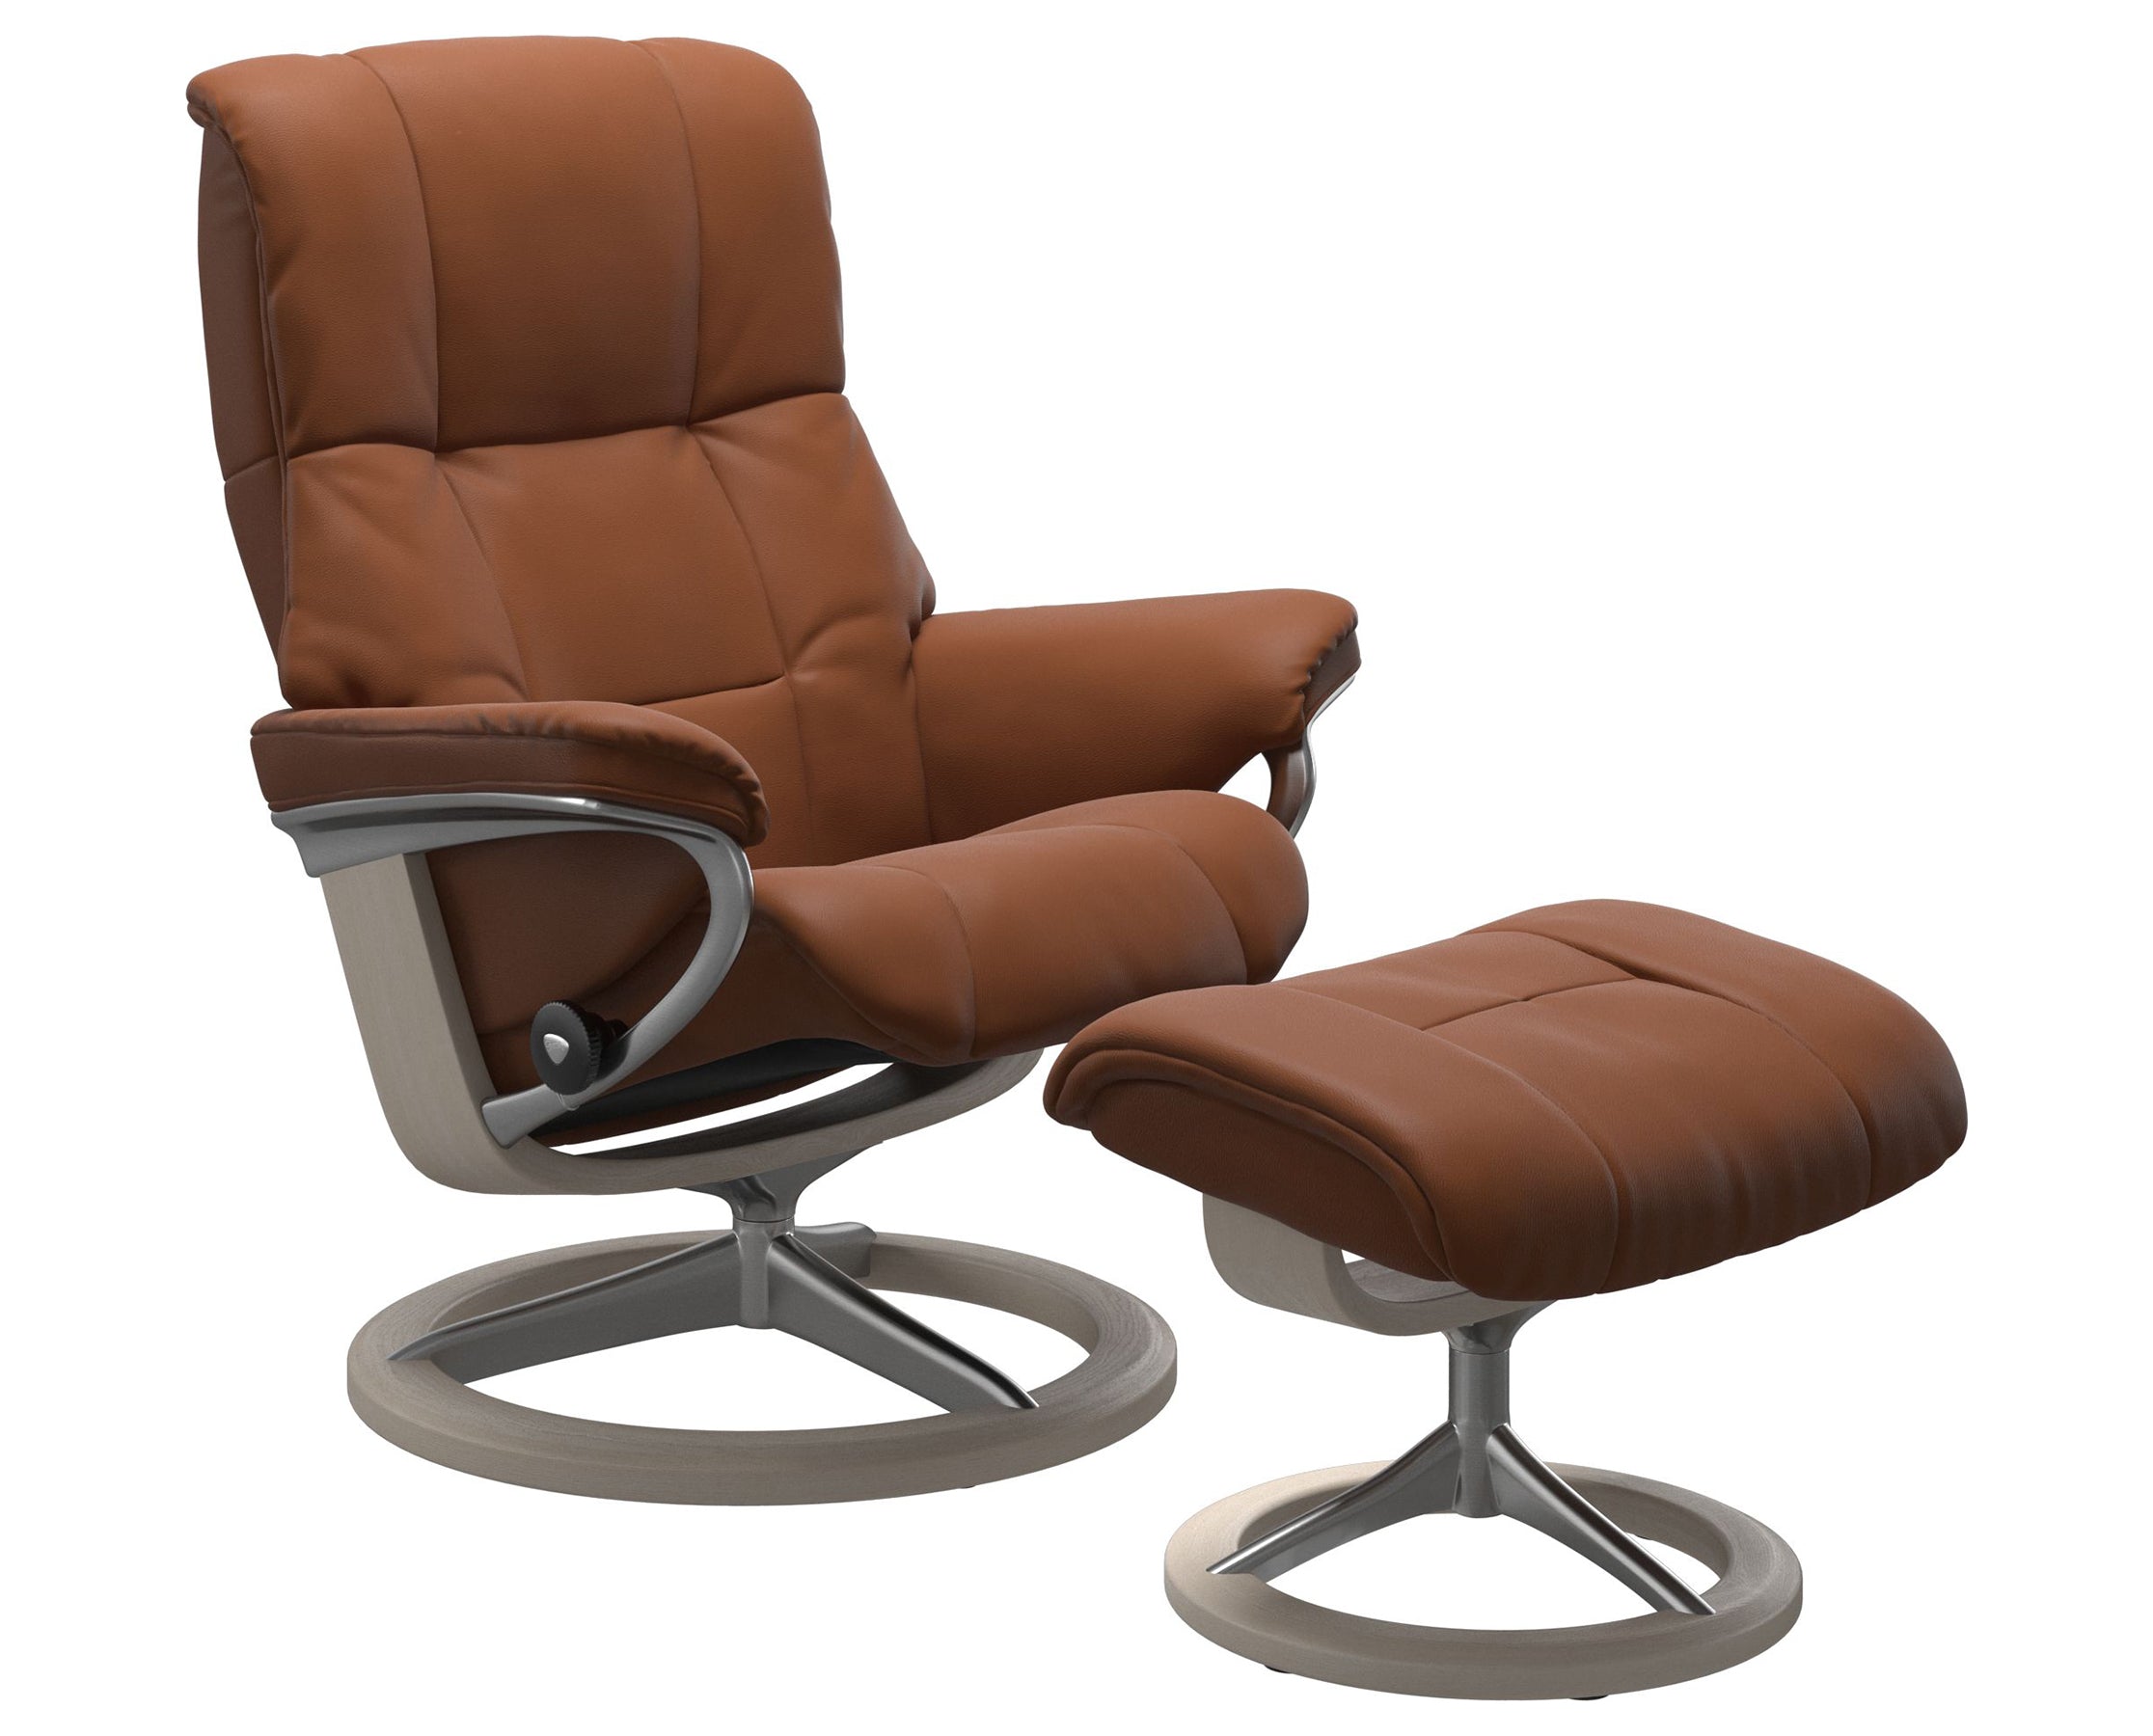 Paloma Leather New Cognac S/M/L and Whitewash Base | Stressless Mayfair Signature Recliner | Valley Ridge Furniture